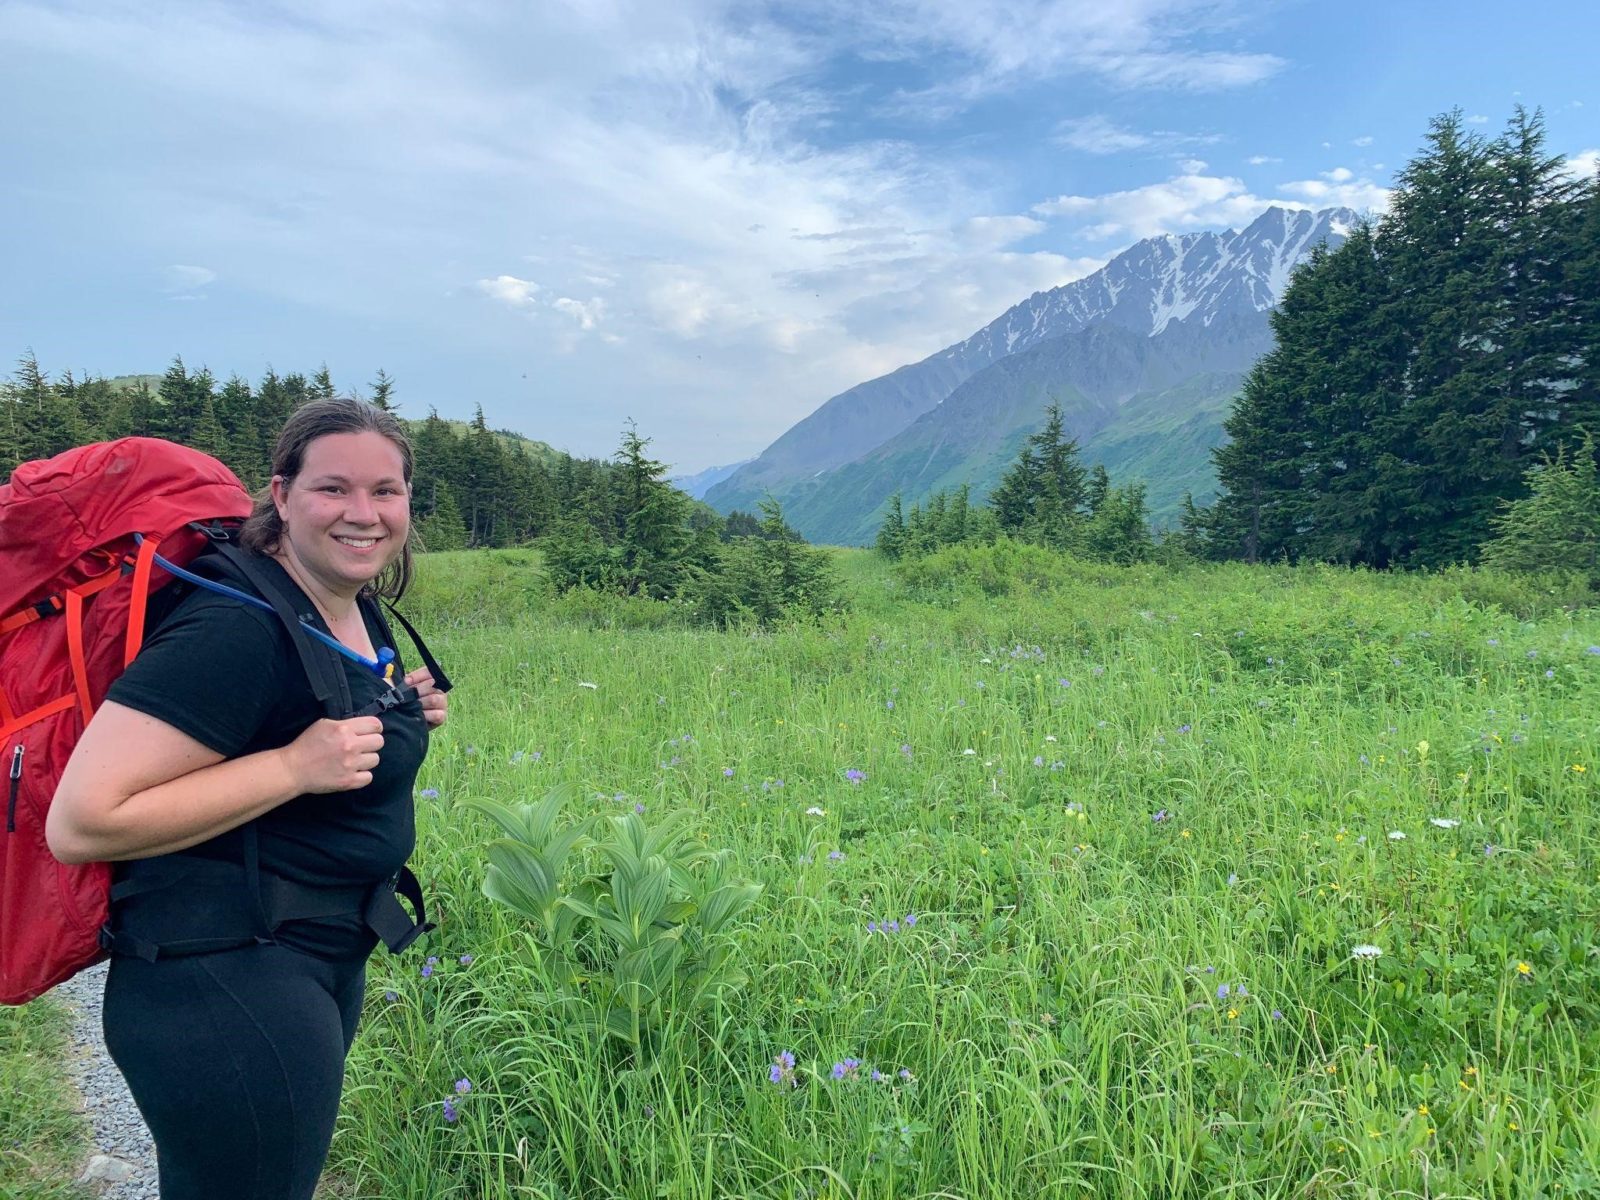 Mackenzie wearing a red backpack in front of a field of wildflowers with a mountain and blue sky while hiking Lost Lake 